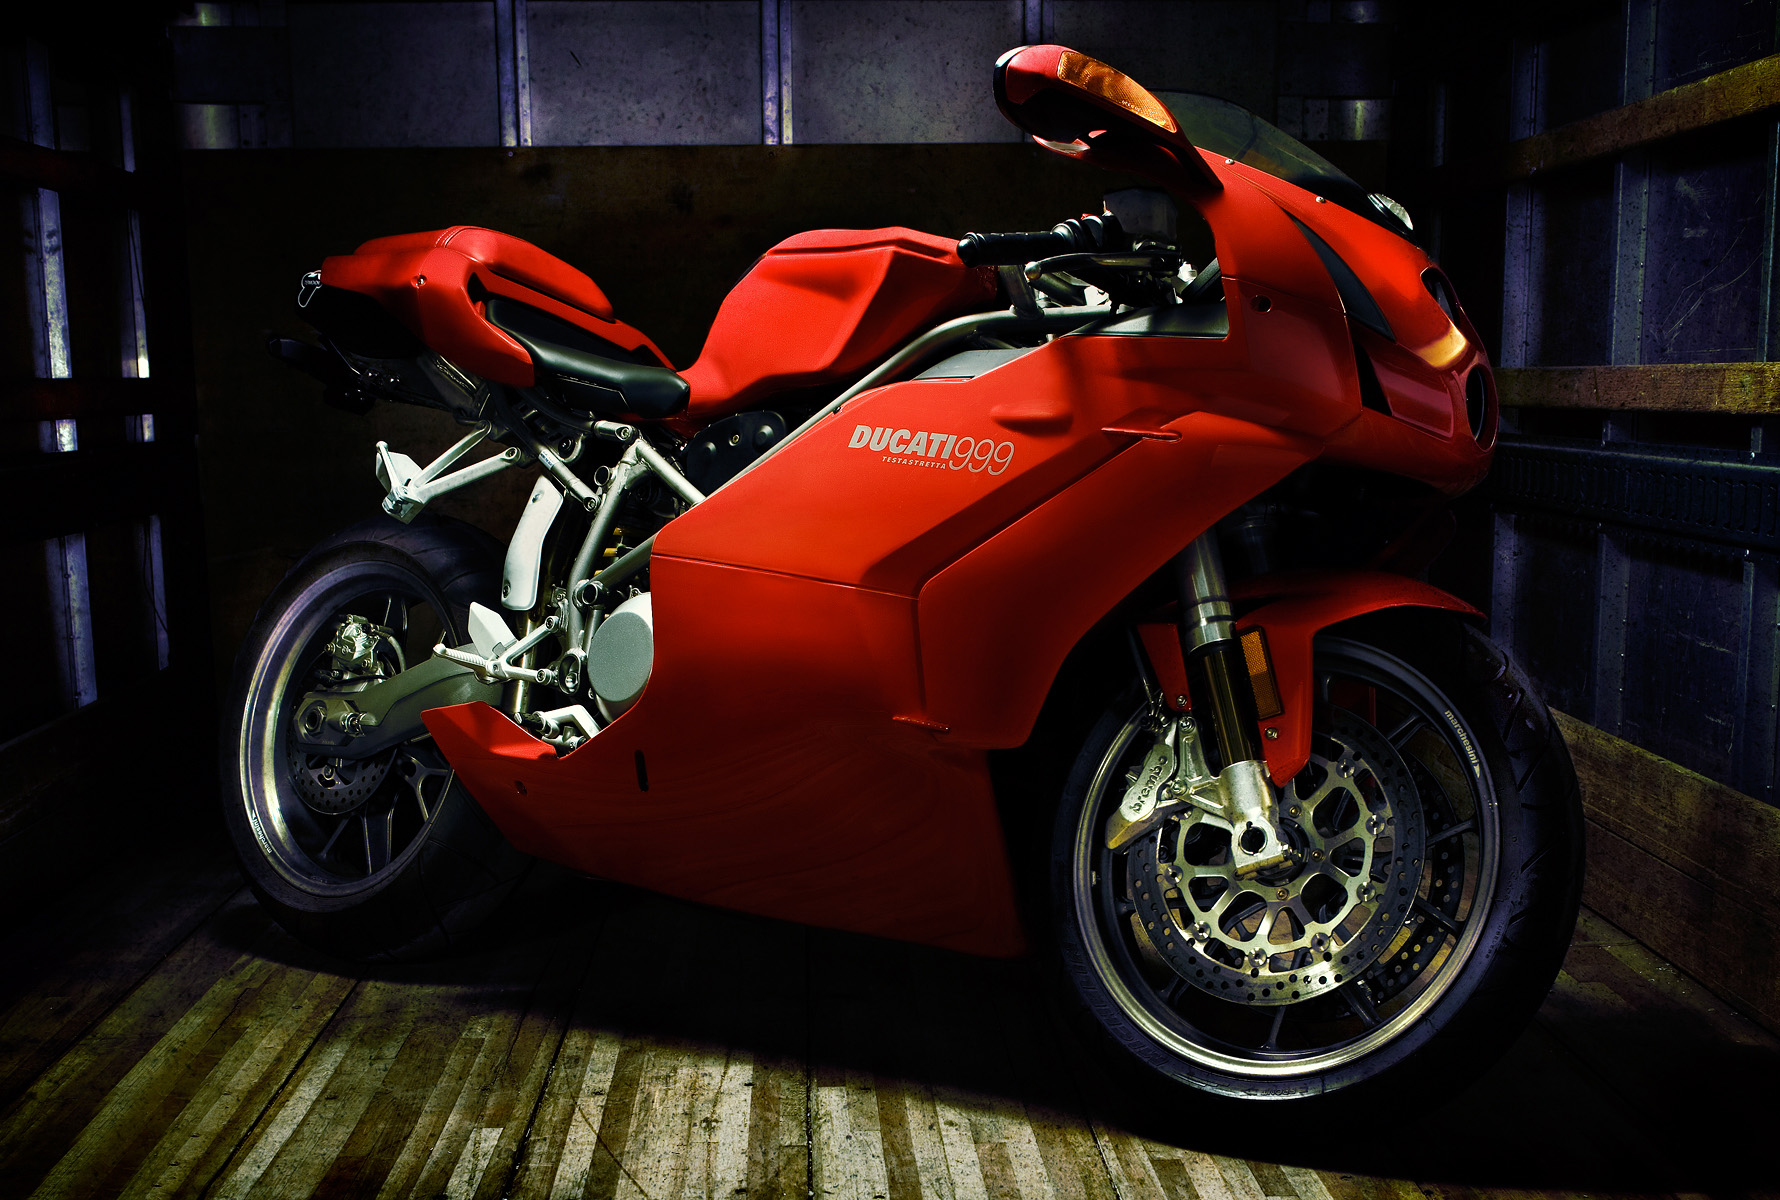 Ducati 999 photographed by Automotive Photographer